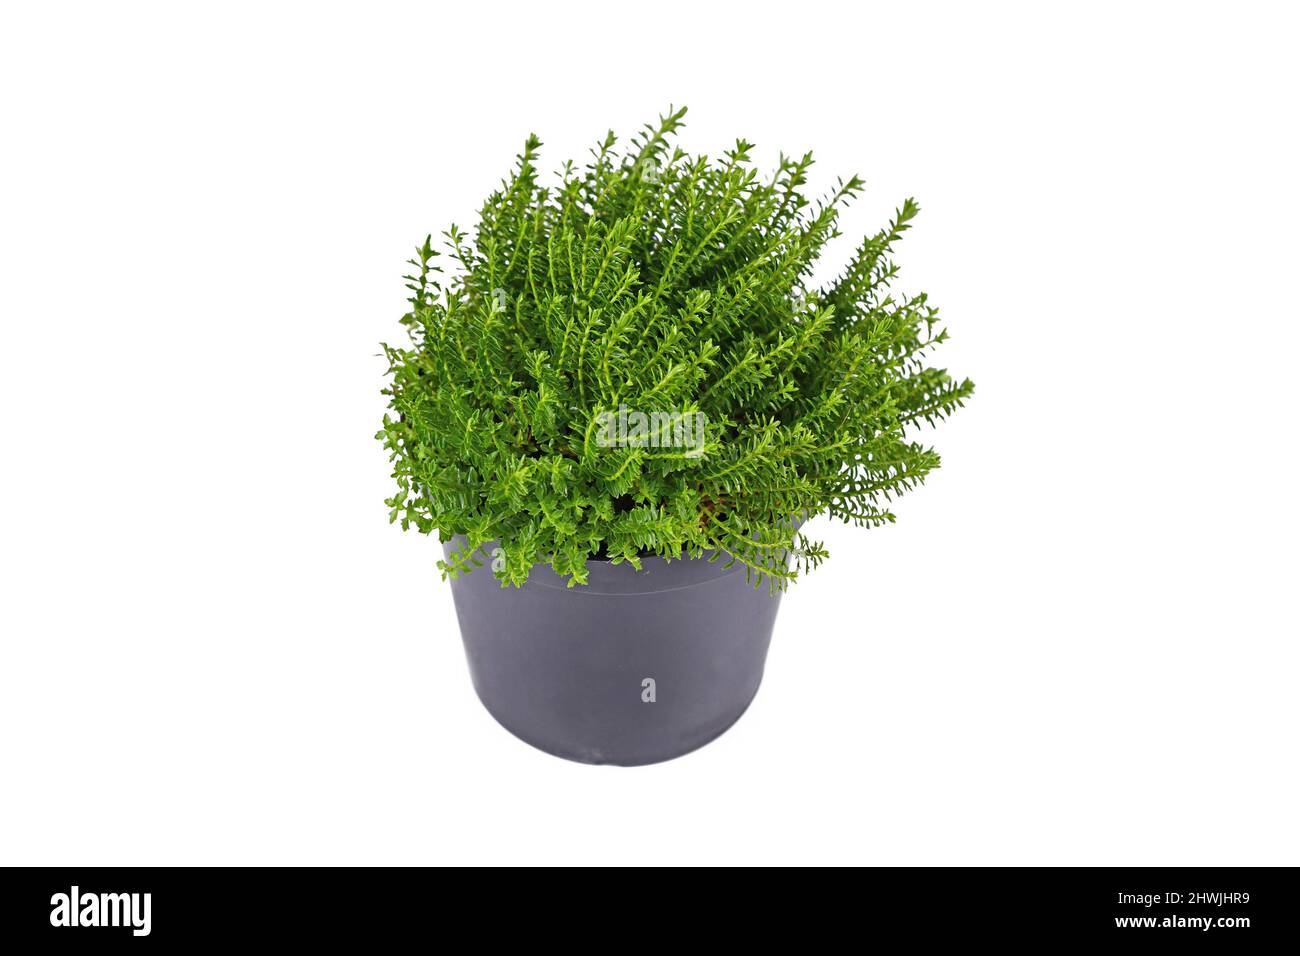 Small 'Hebe Armstrongii' hybrid plant in flower pot on white background Stock Photo